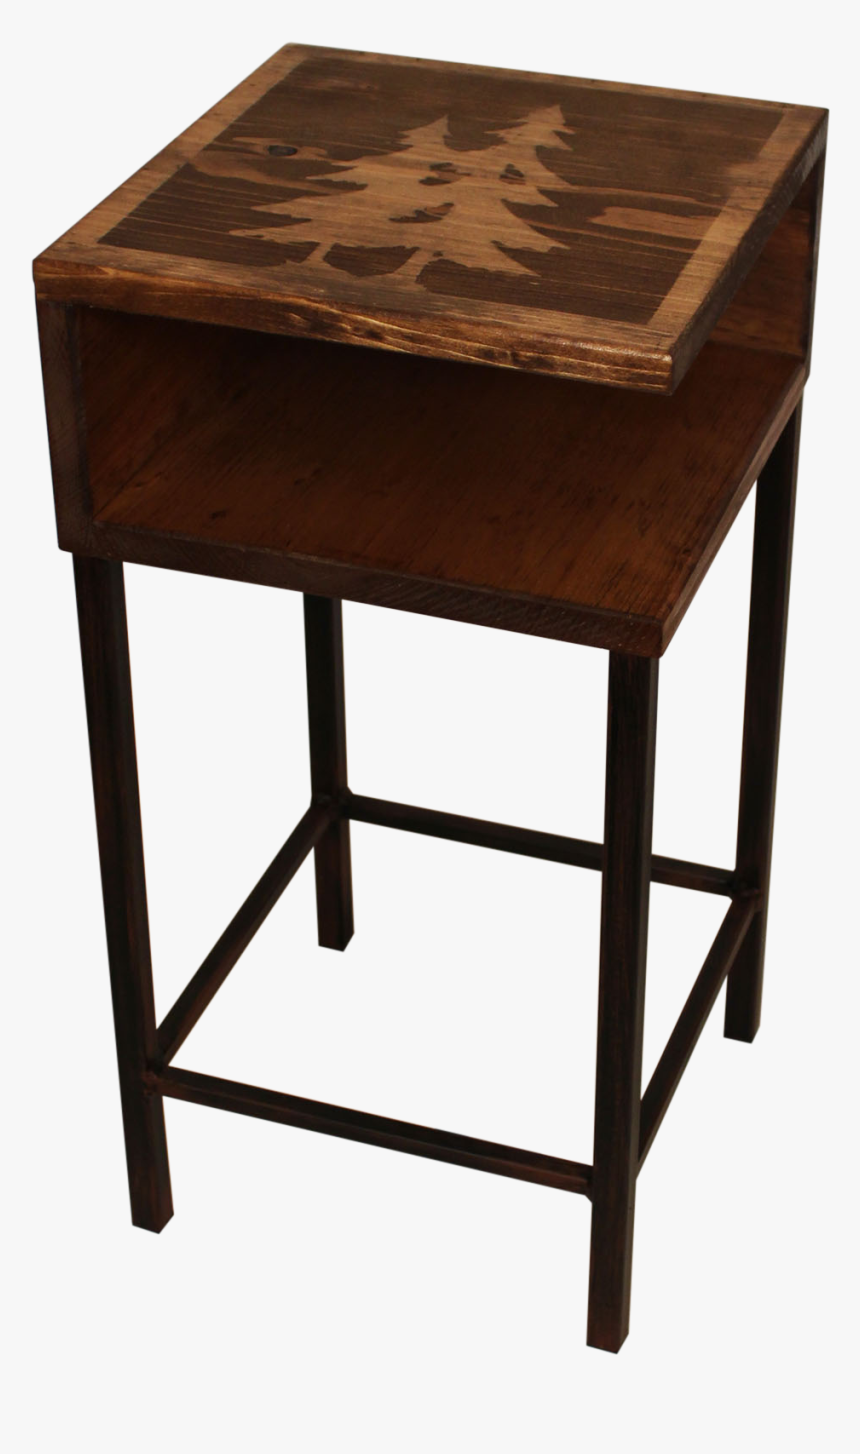 Burnt Sienna/stain Iron Drink Table With Wooden Shelf - Forno Para Assar Frango, HD Png Download, Free Download